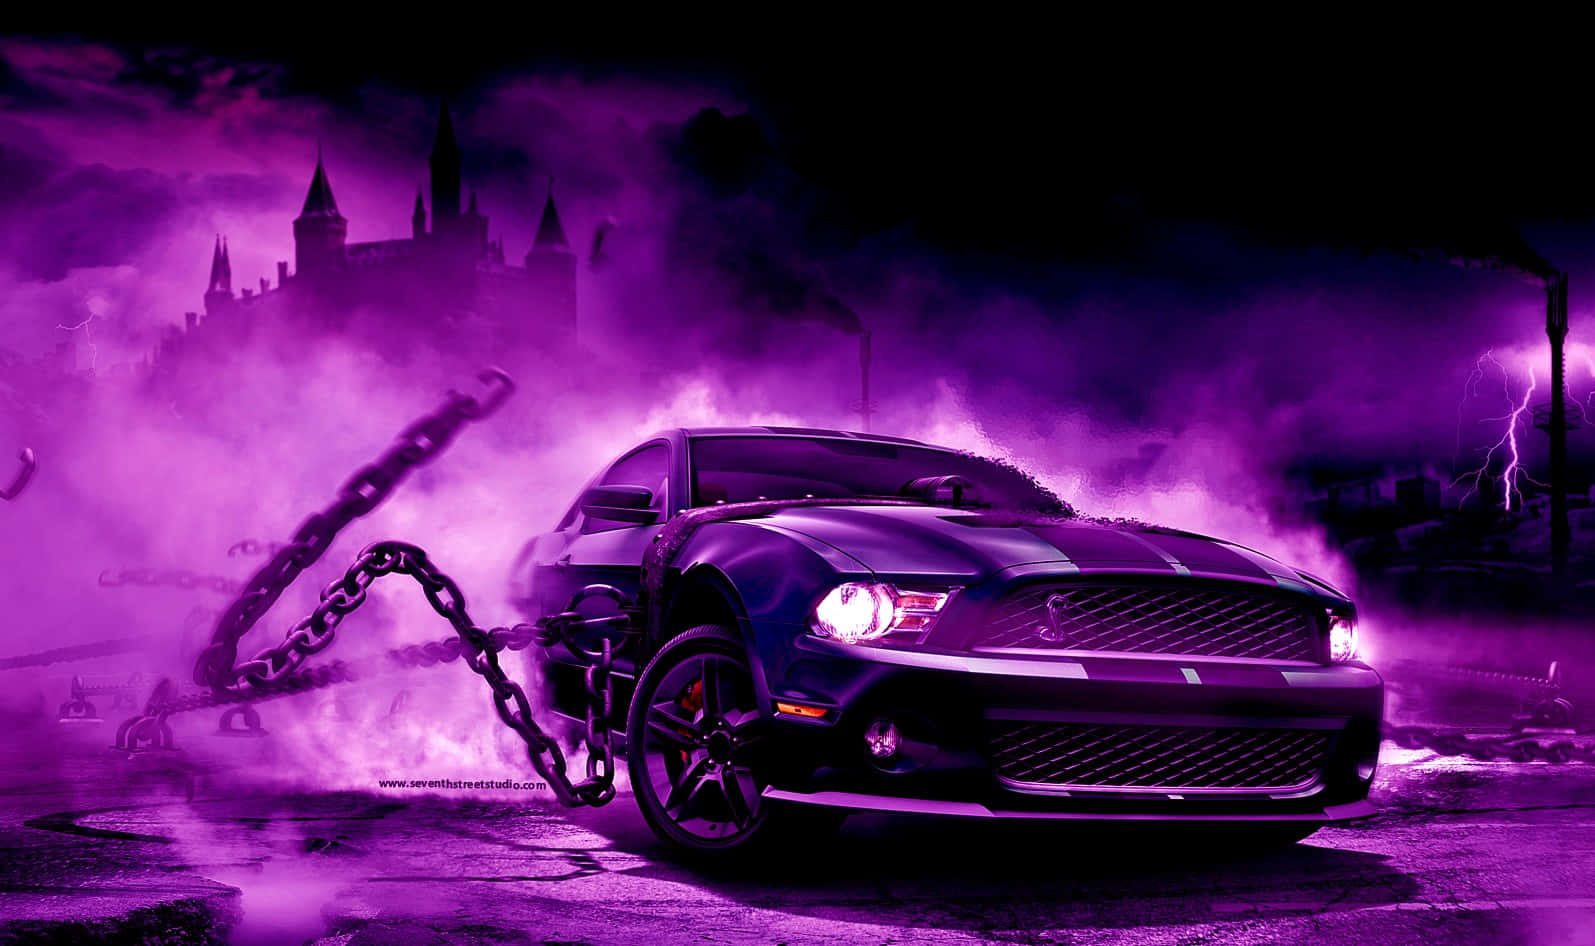 Purple Car With Chains And Castle In The Background